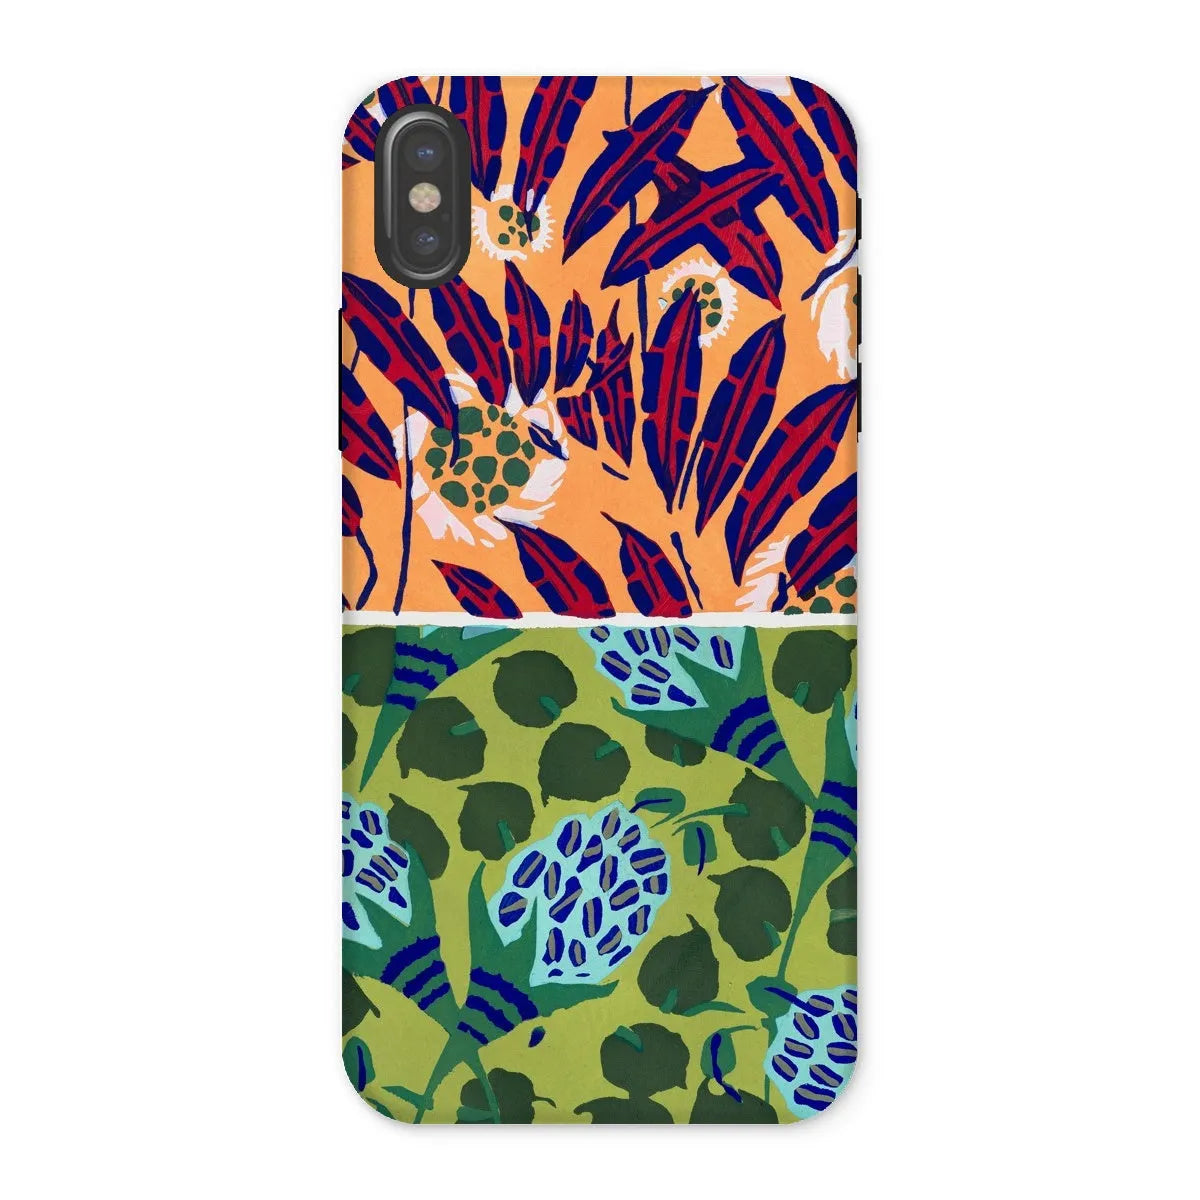 Fabric & Rugs Too - Pochoir Pattern Phone Case - E. A. Séguy - Iphone x / Matte - Mobile Phone Cases - Aesthetic Art